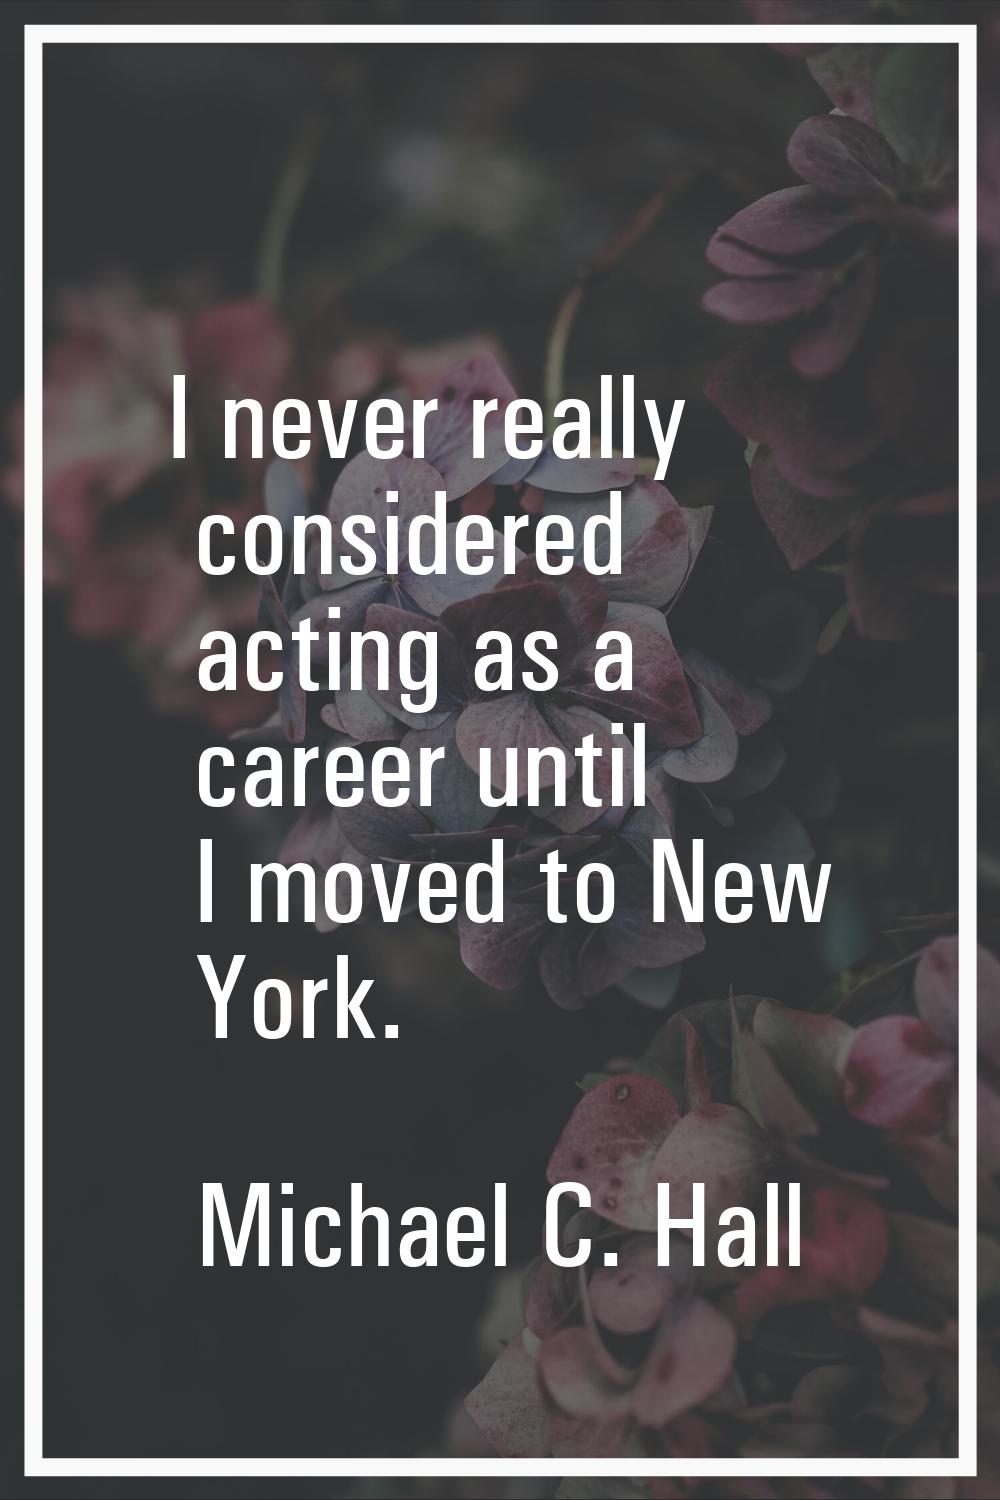 I never really considered acting as a career until I moved to New York.